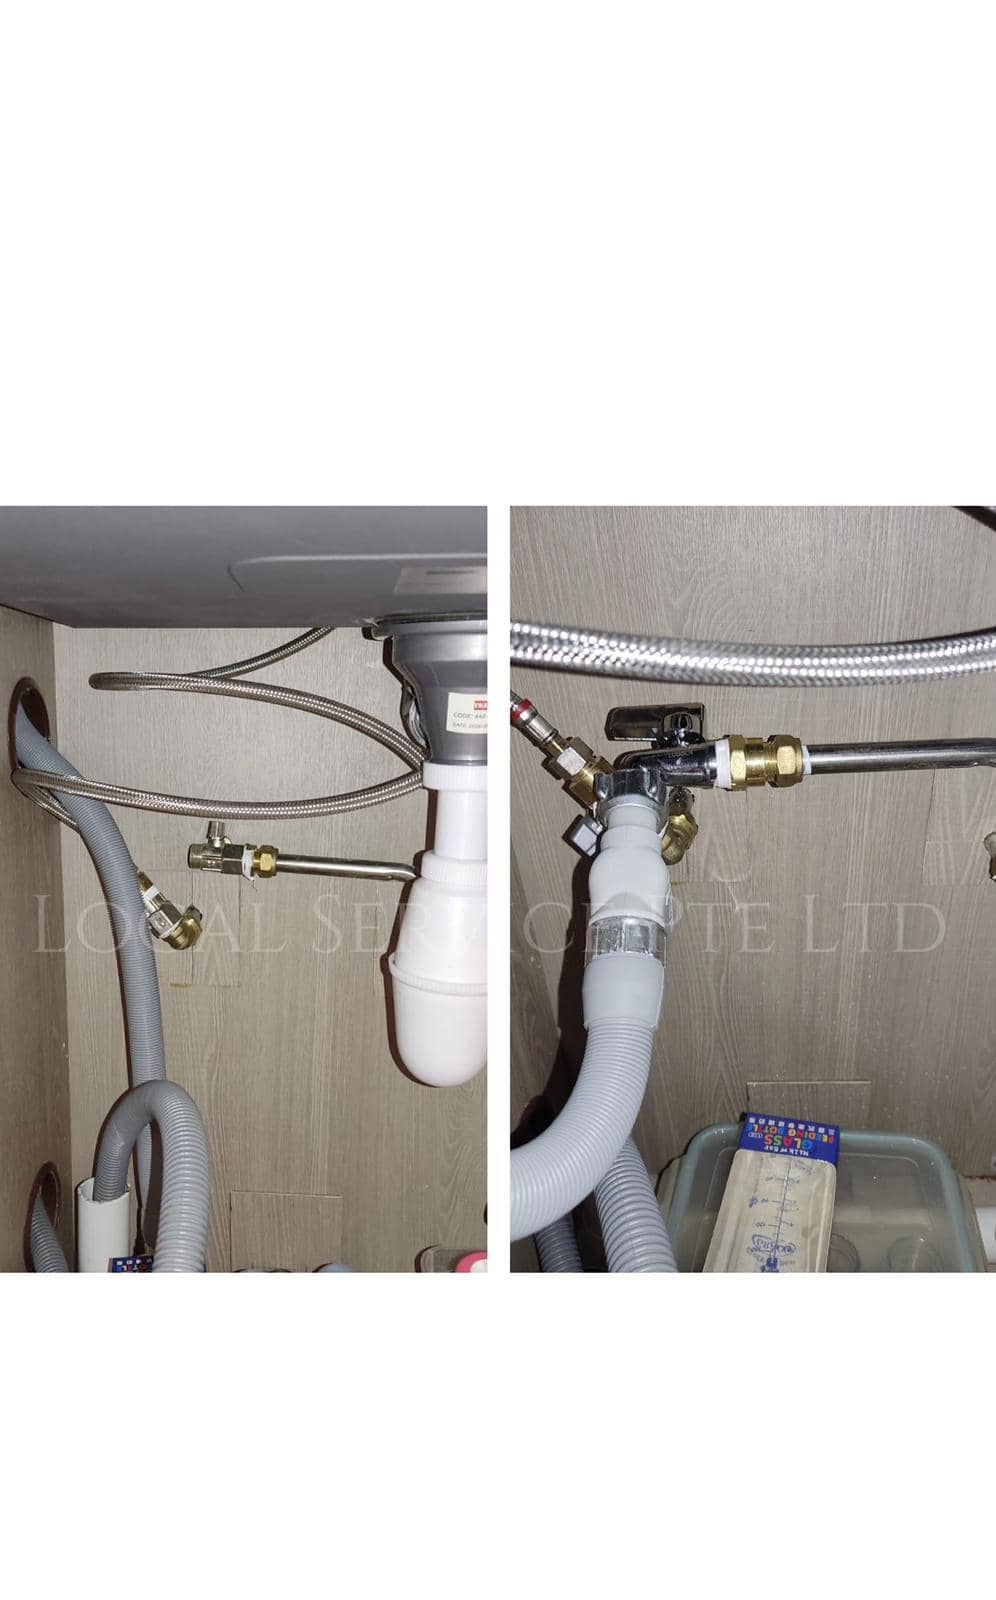 Install Water Tap To Connect Dish Washer And Outlet